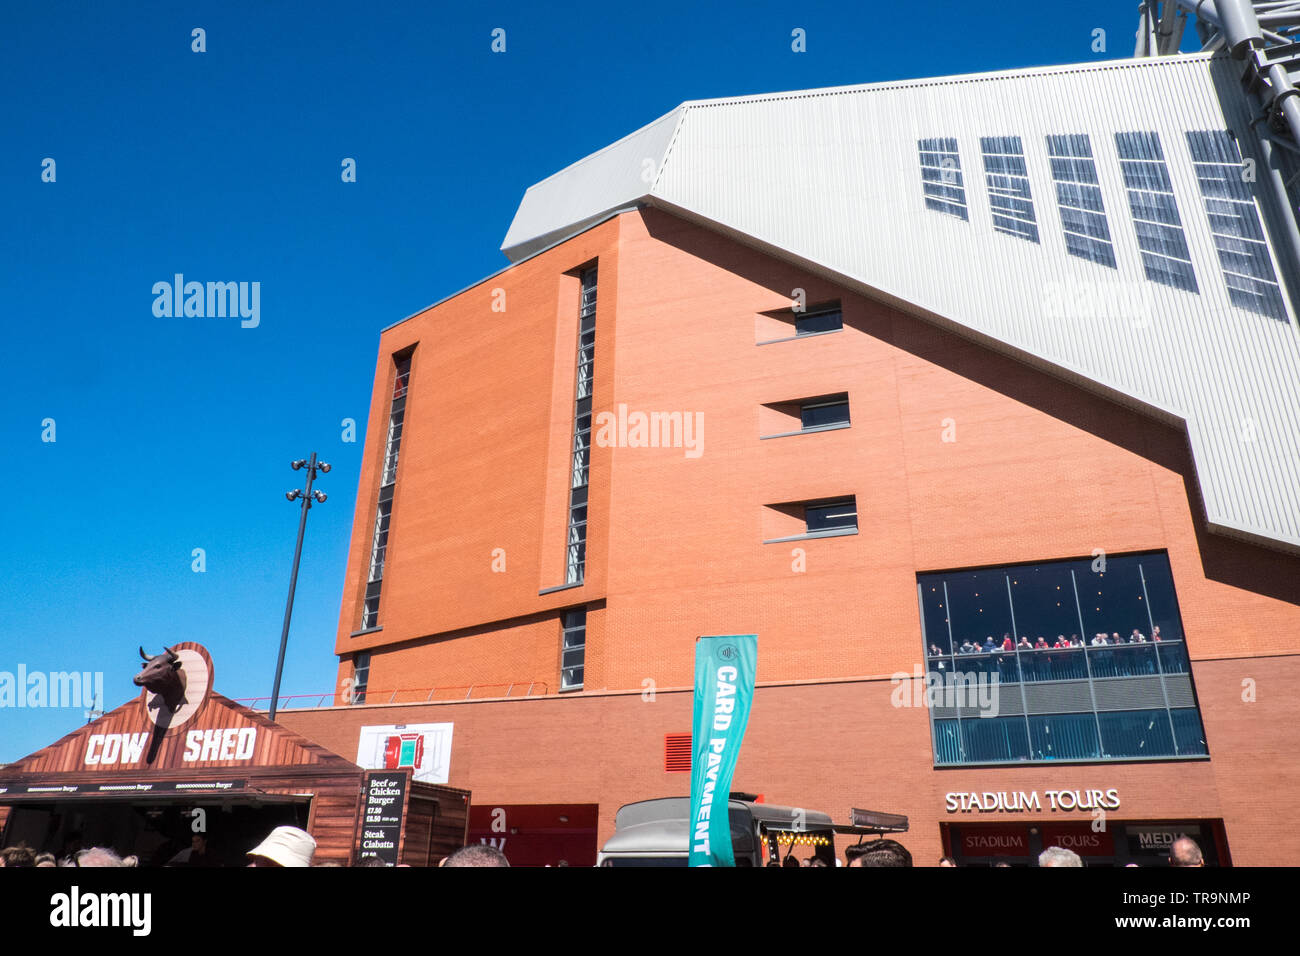 Anfield,stadium,home,ground,of,Liverpool,football,club,LFC,on,the,last,day,game,of,Premier,League,Liverpool,Merseyside,England,GB,Britain,British,UK Stock Photo